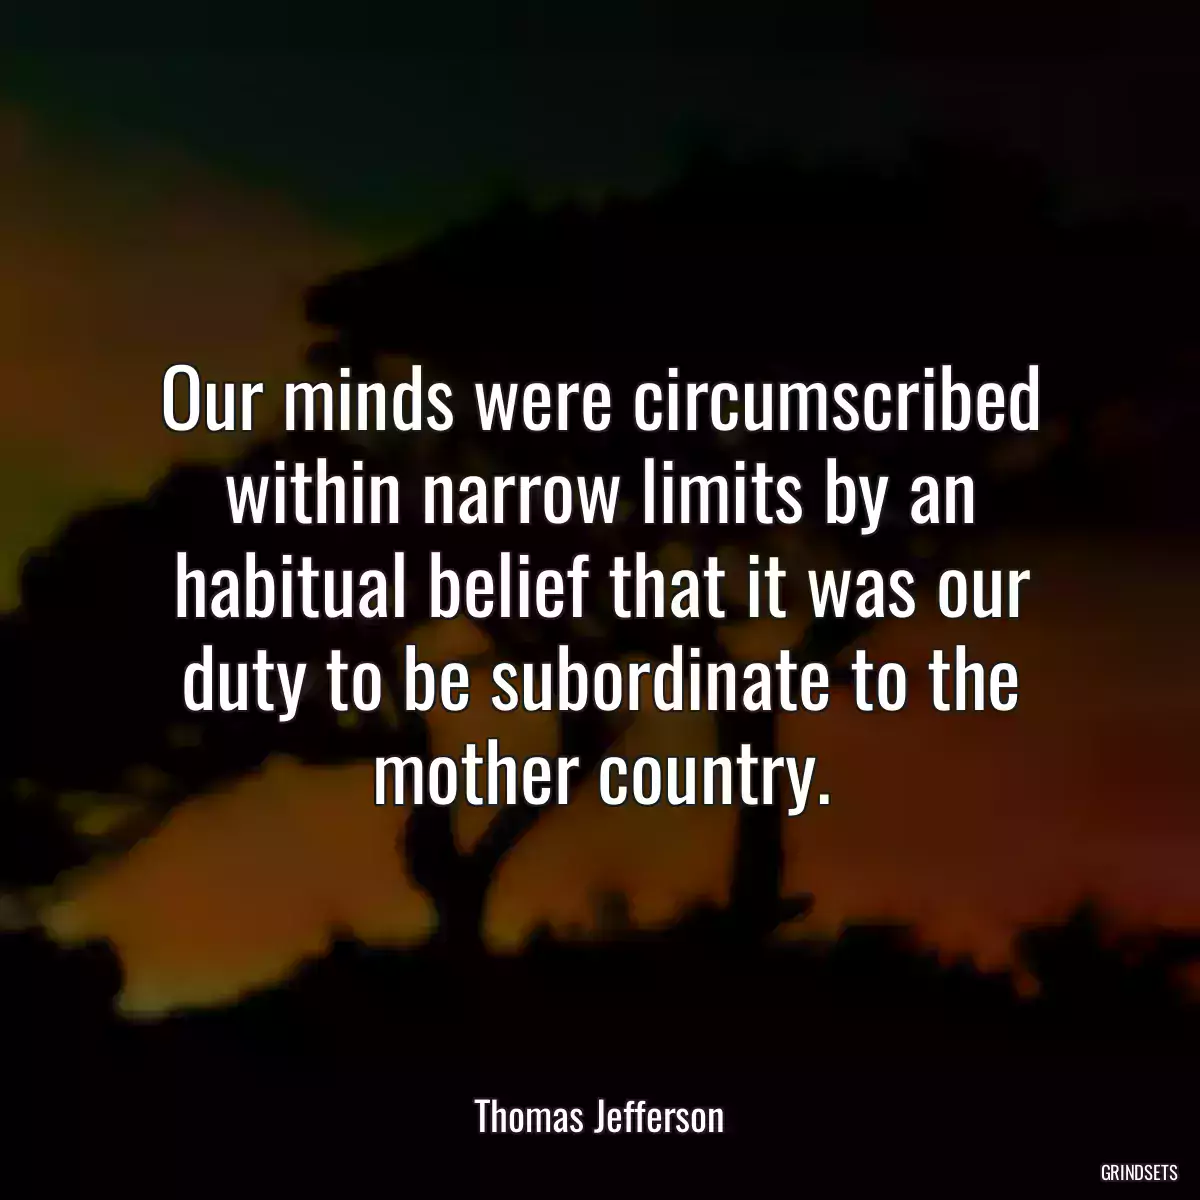 Our minds were circumscribed within narrow limits by an habitual belief that it was our duty to be subordinate to the mother country.